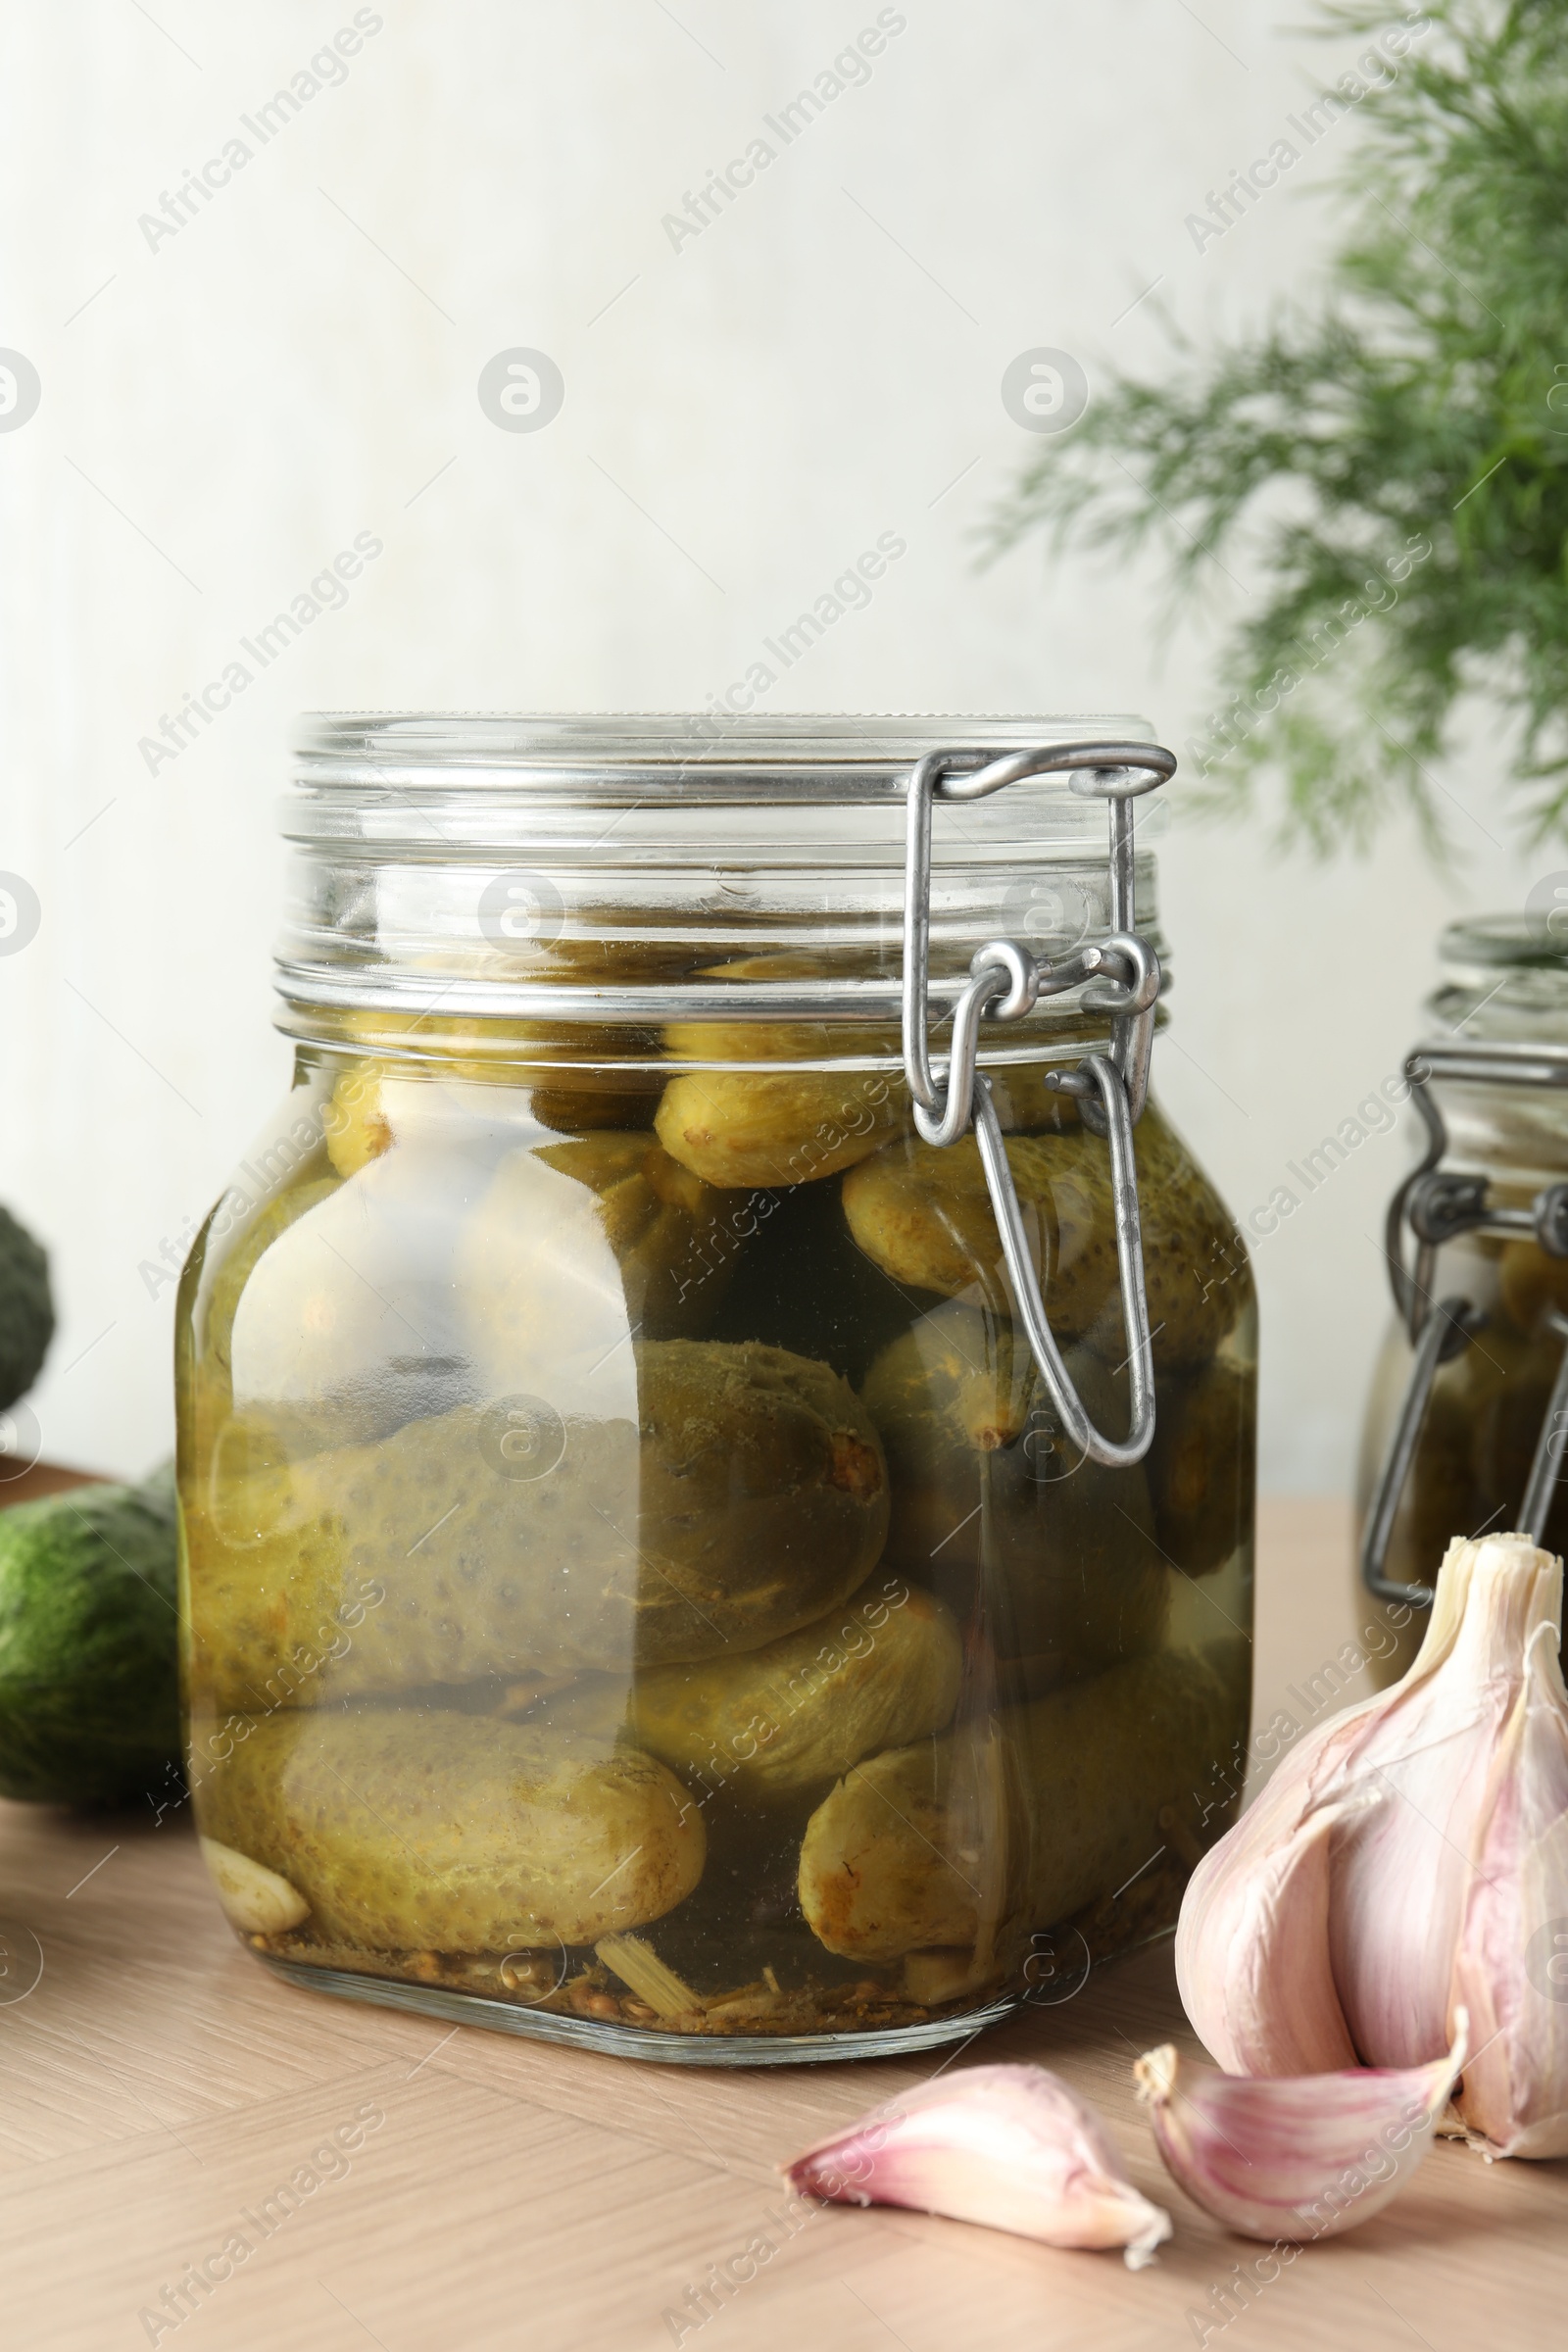 Photo of Pickled cucumbers in jar and garlic on wooden table, closeup